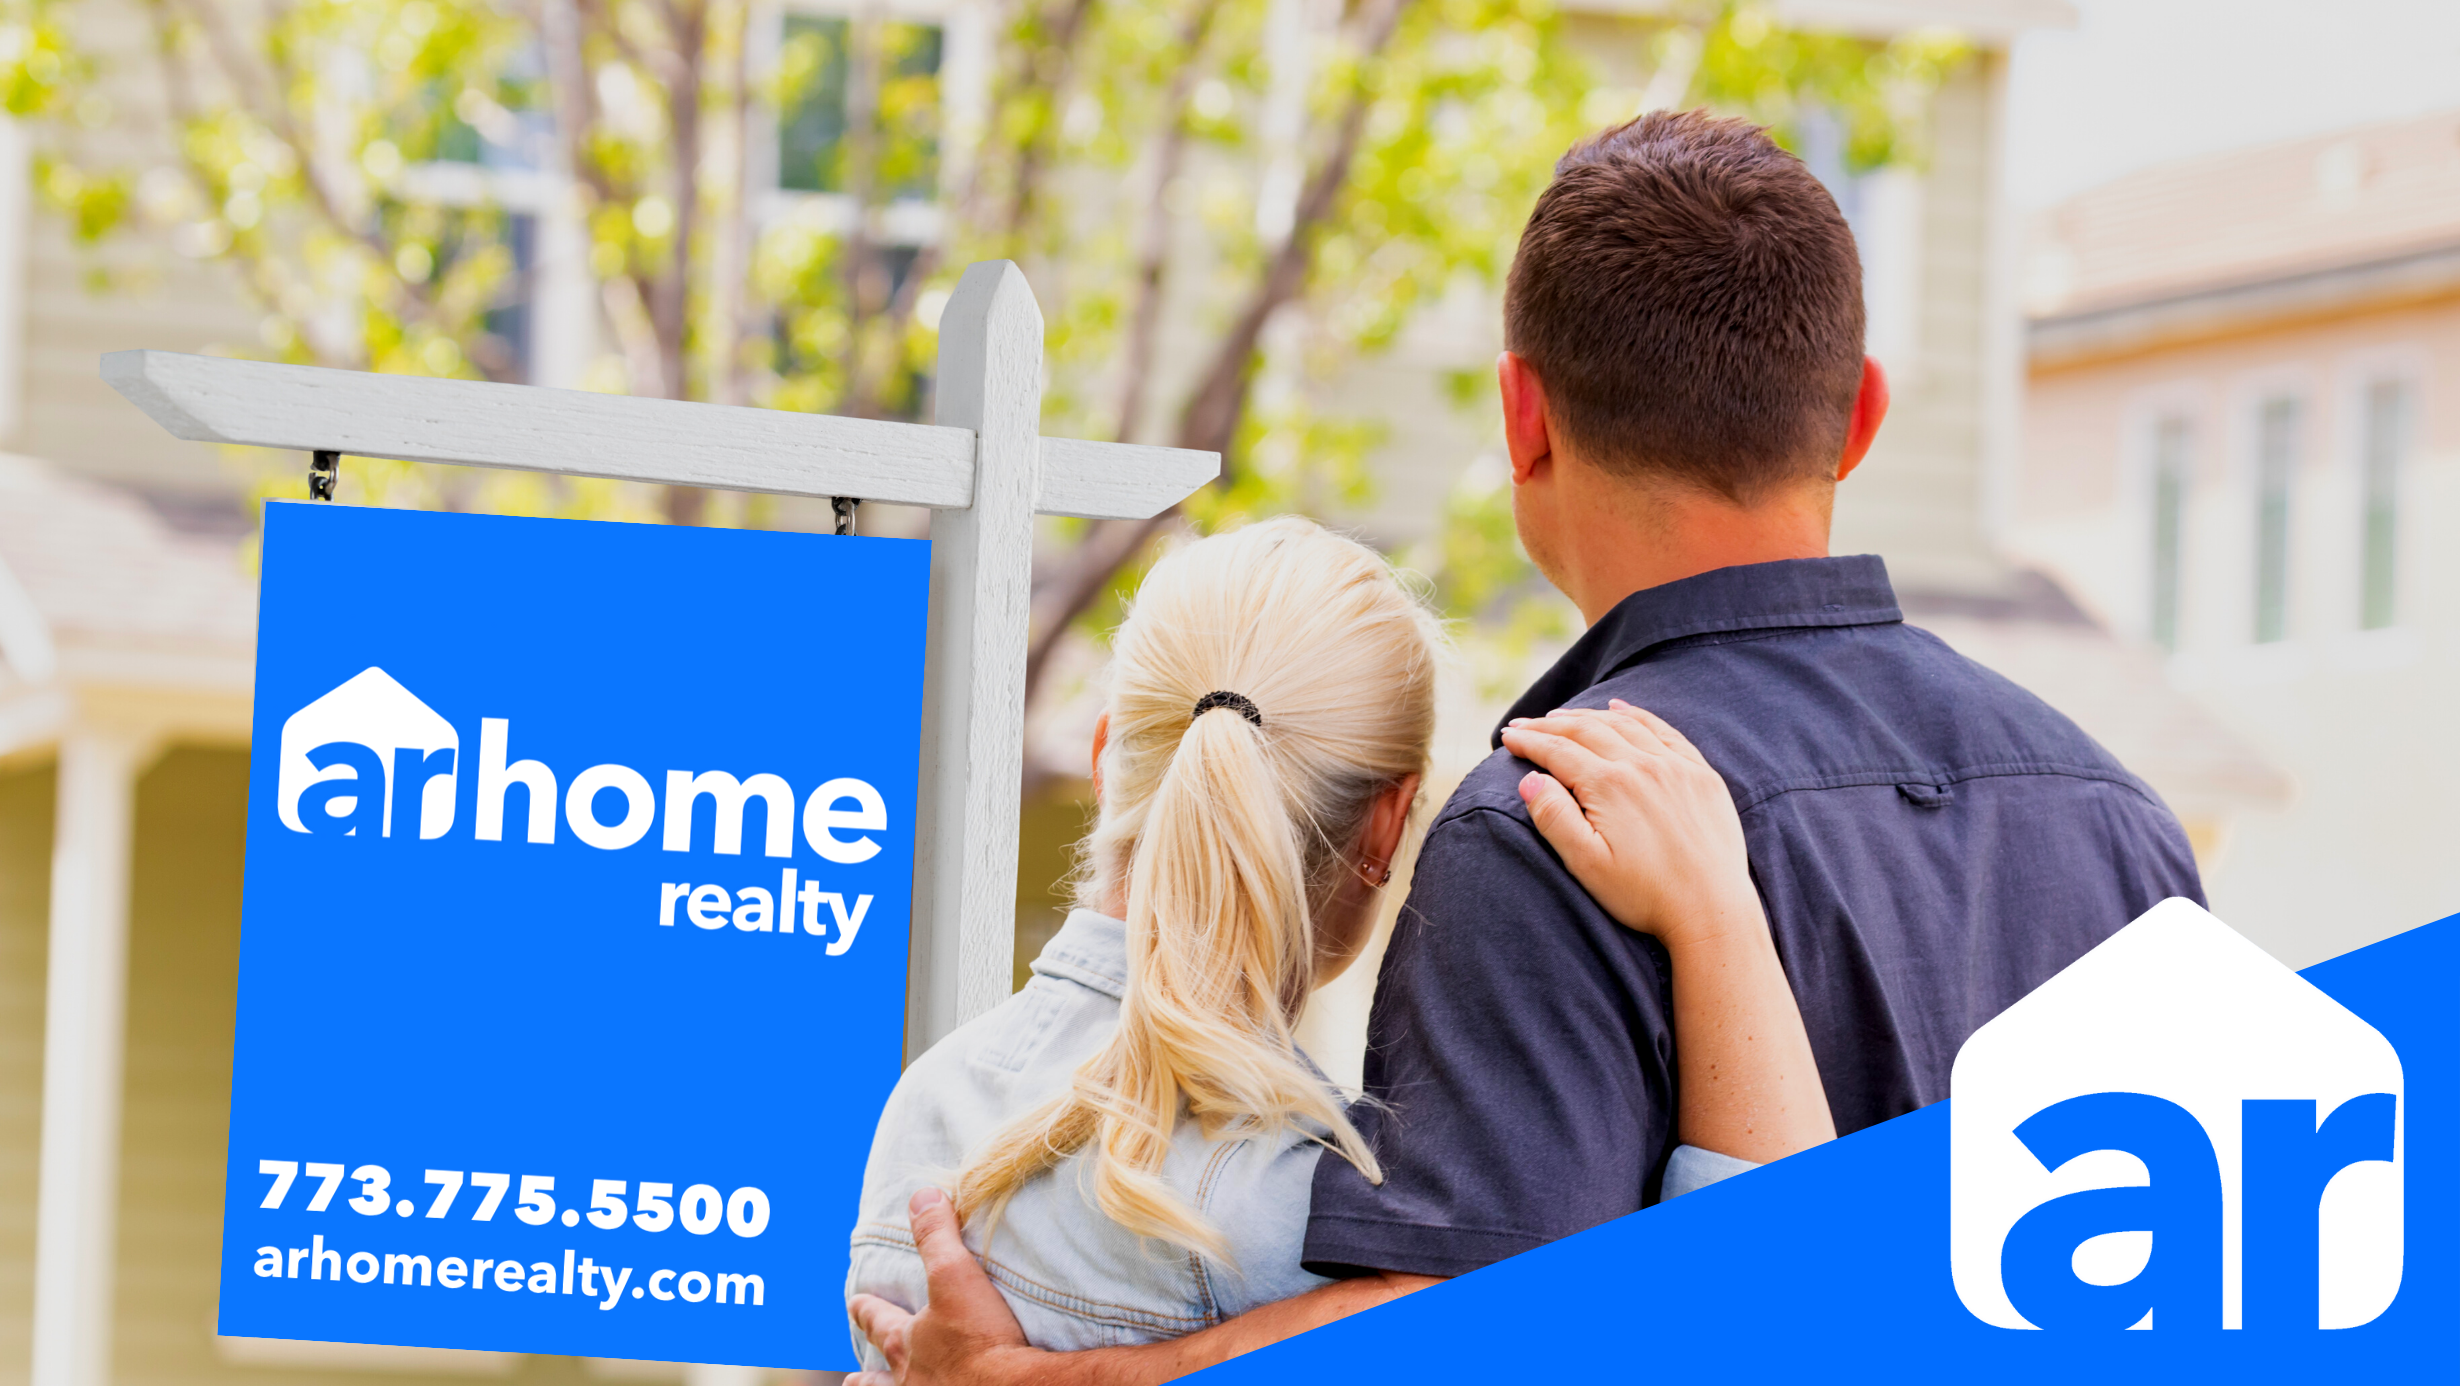 A couple hugging while looking out at an arhome realty house sign